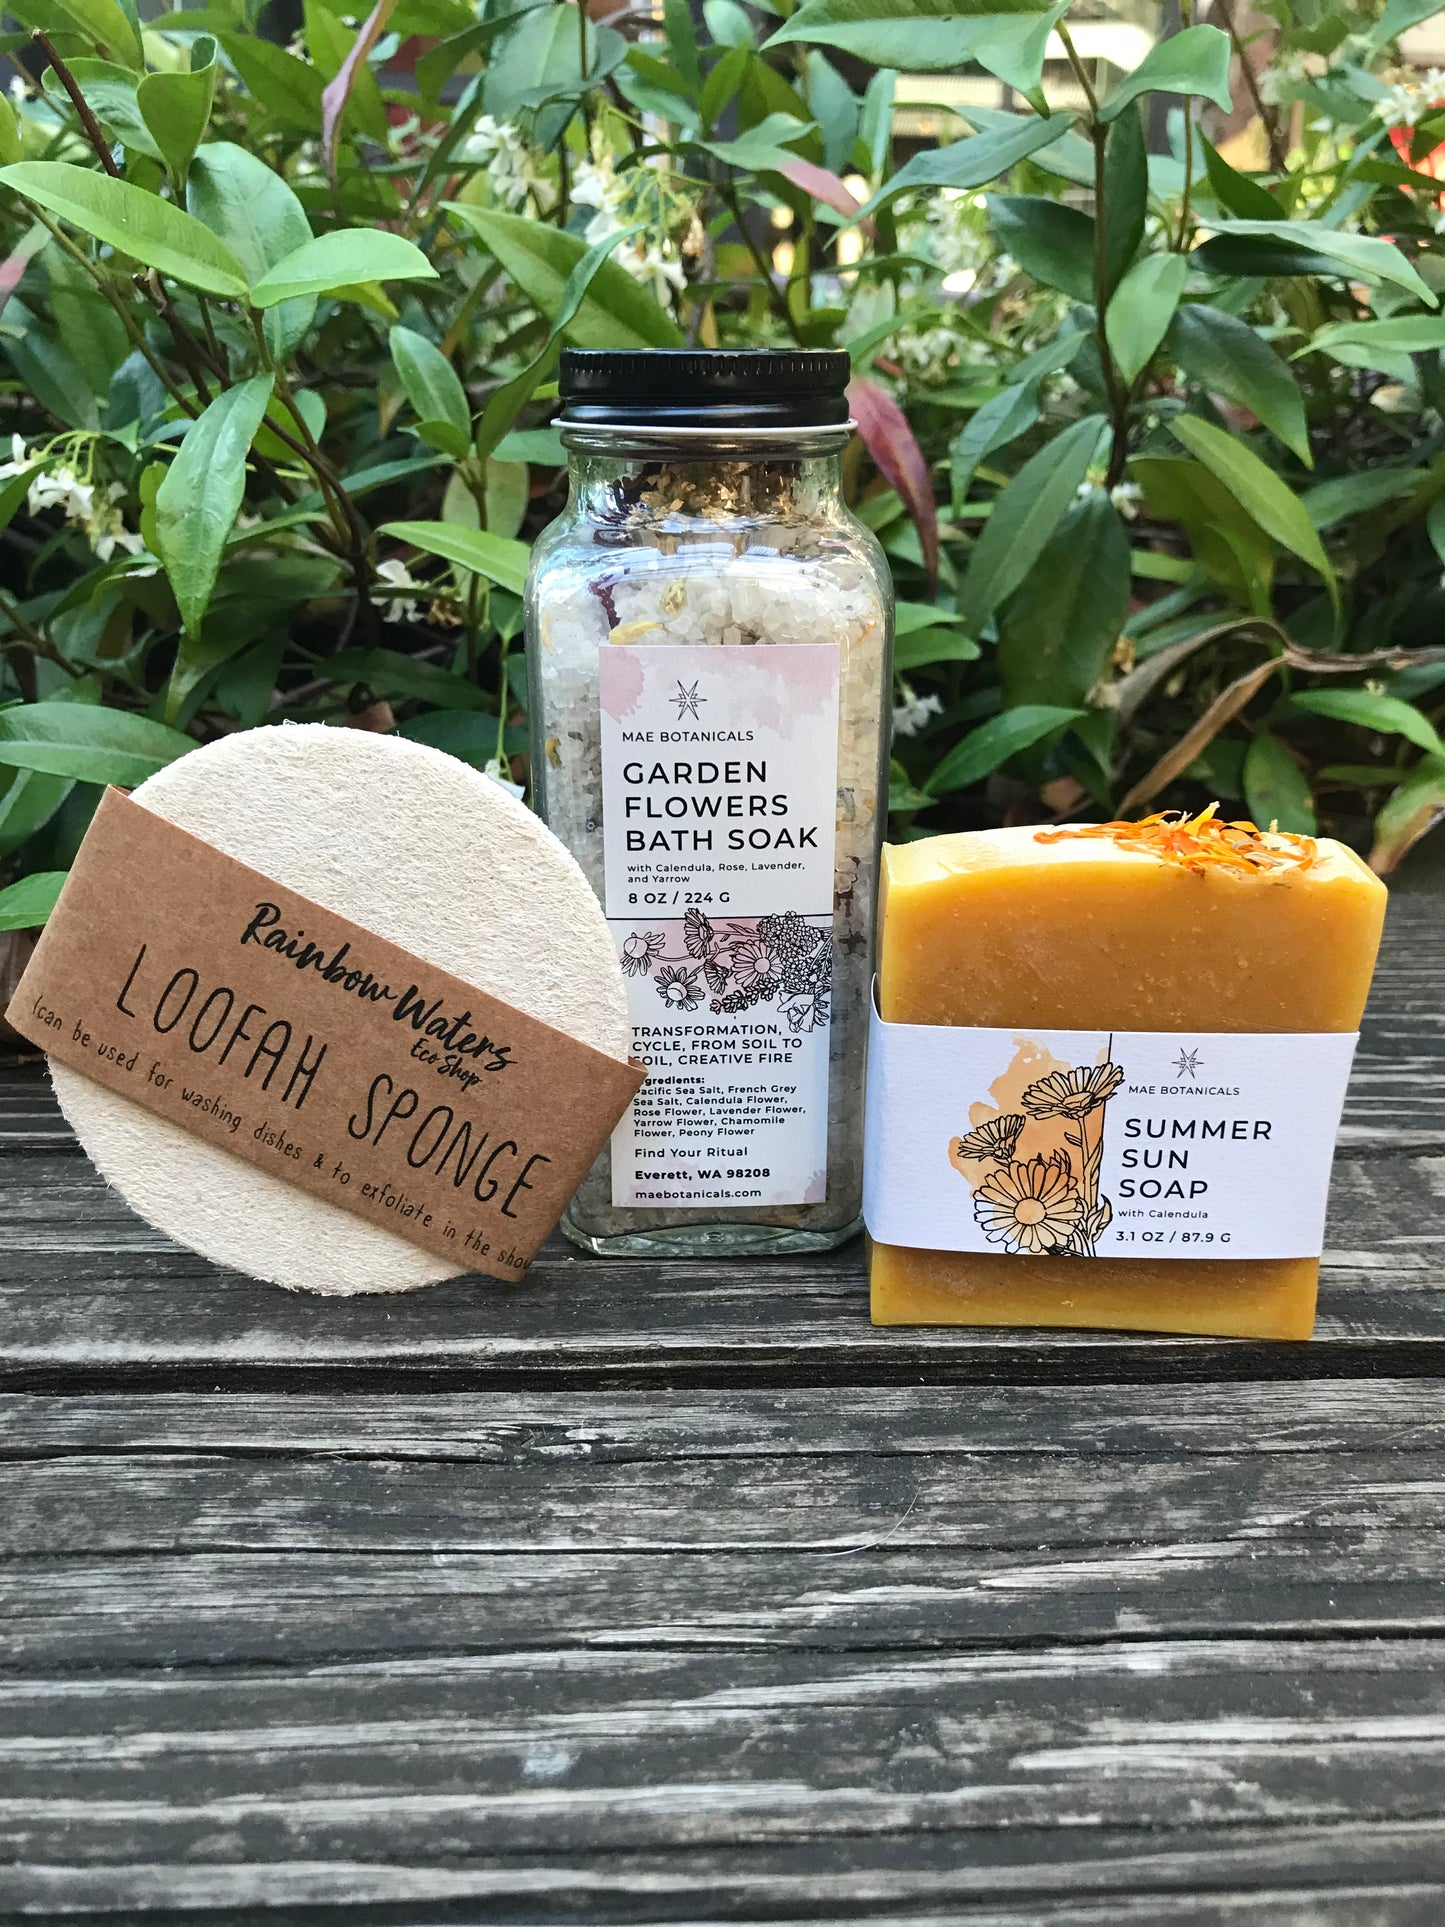 Garden flowers bath soak with loofah and soap